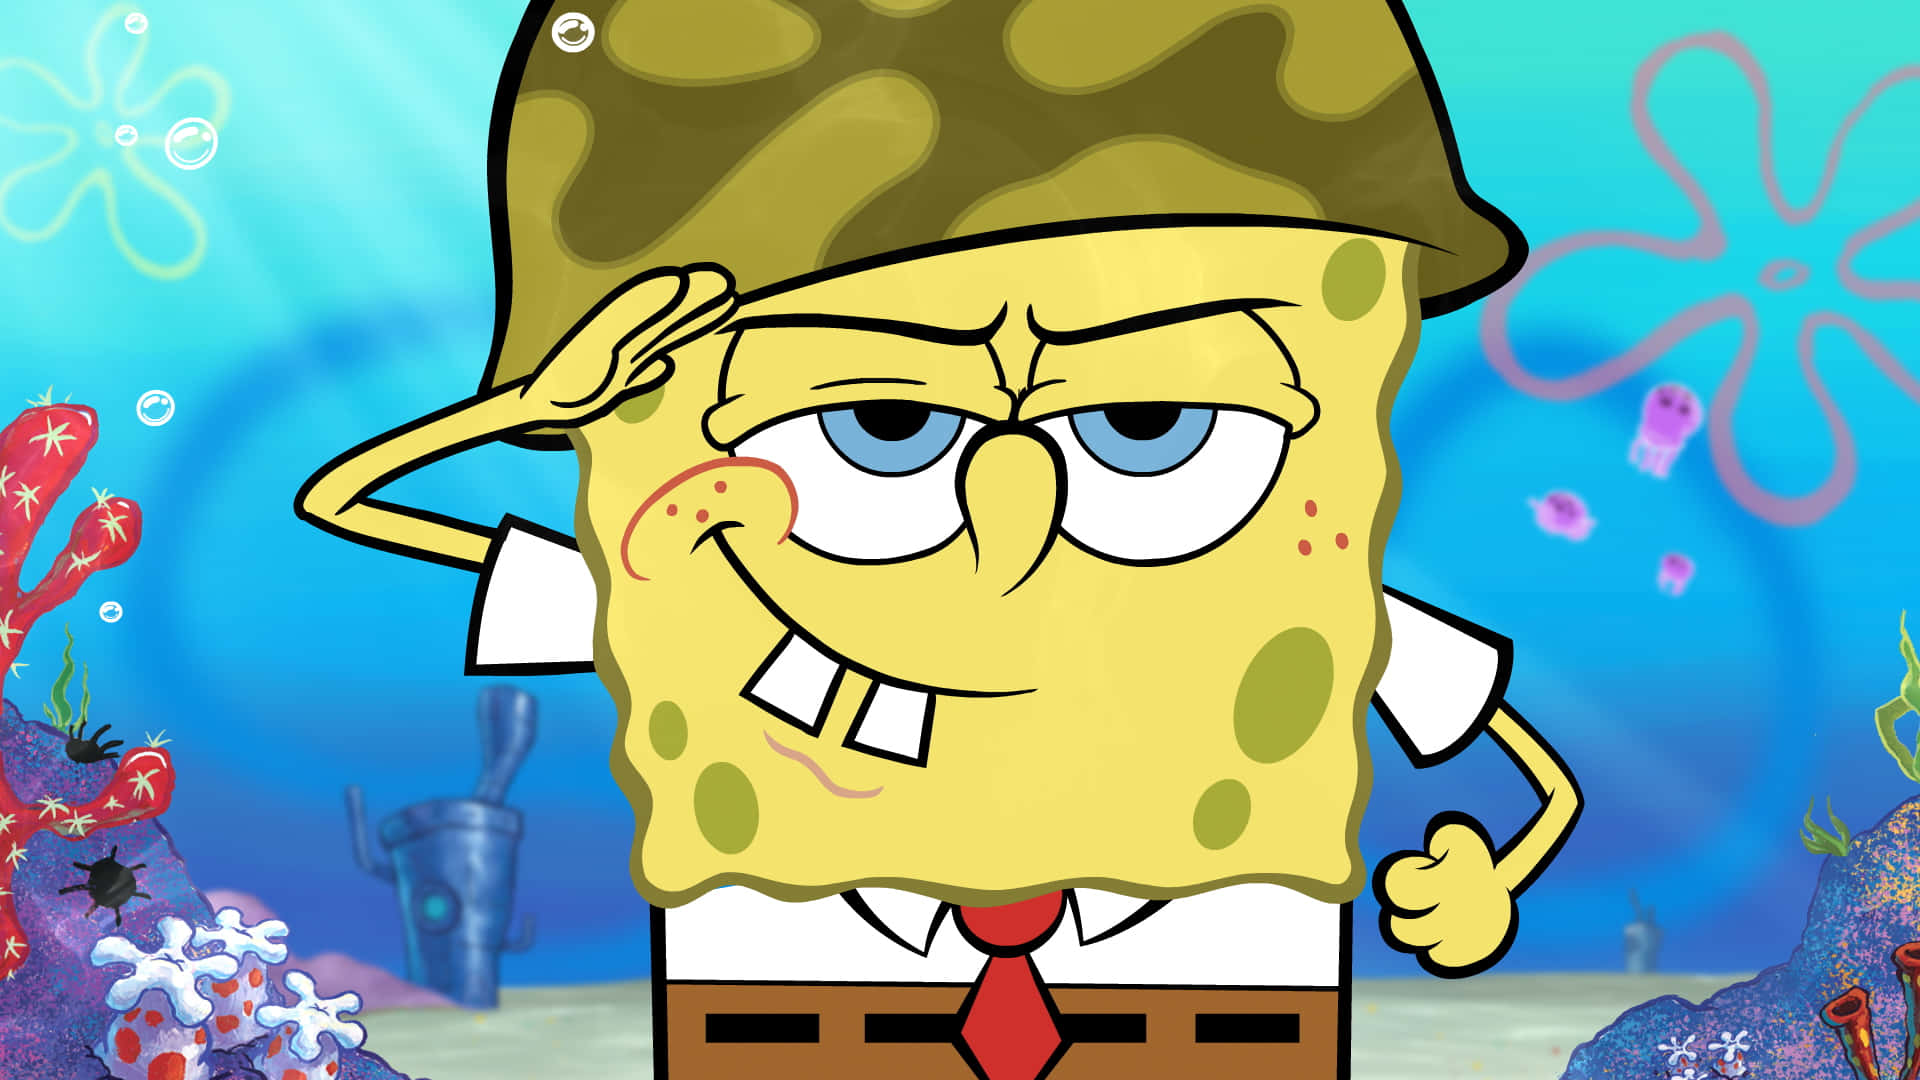 All of your favourite Spongebob Squarepants characters in one place Wallpaper